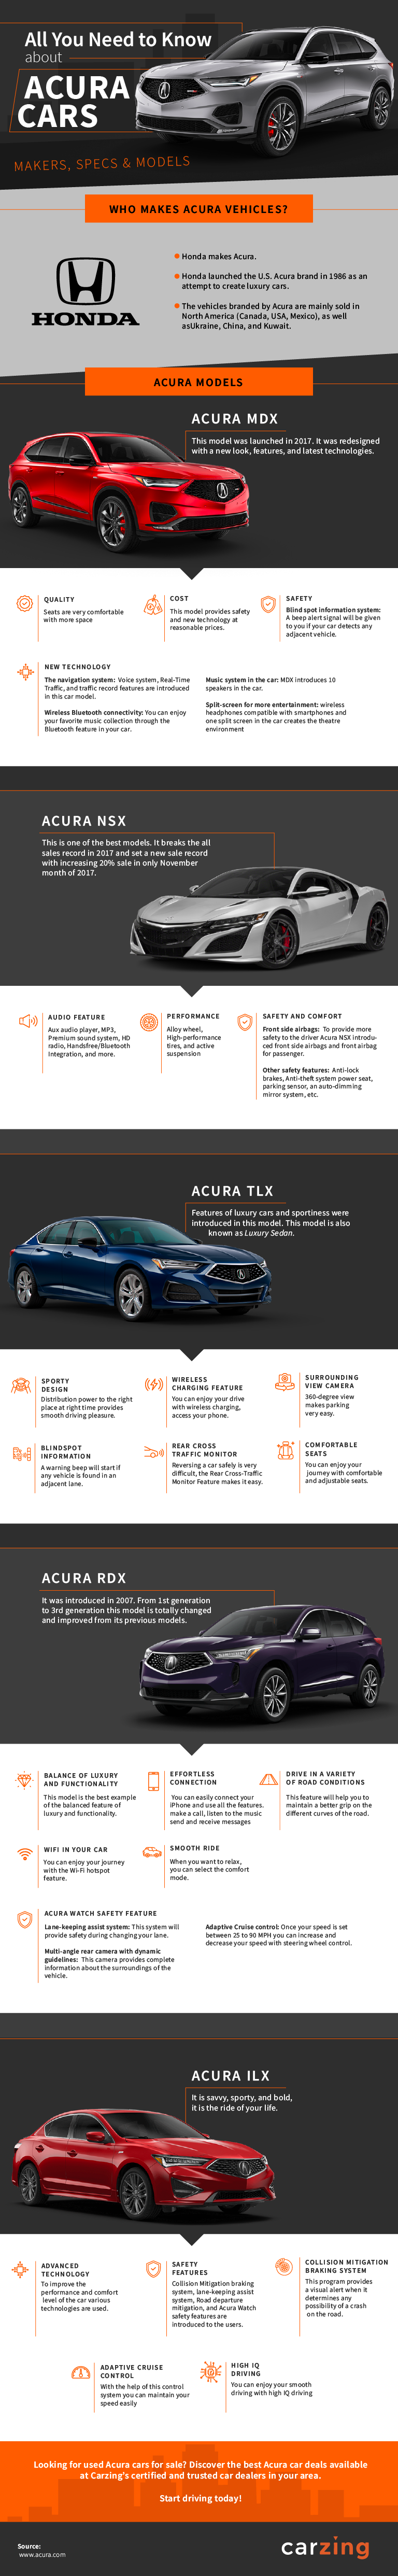 All You Need to Know About Acura Cars